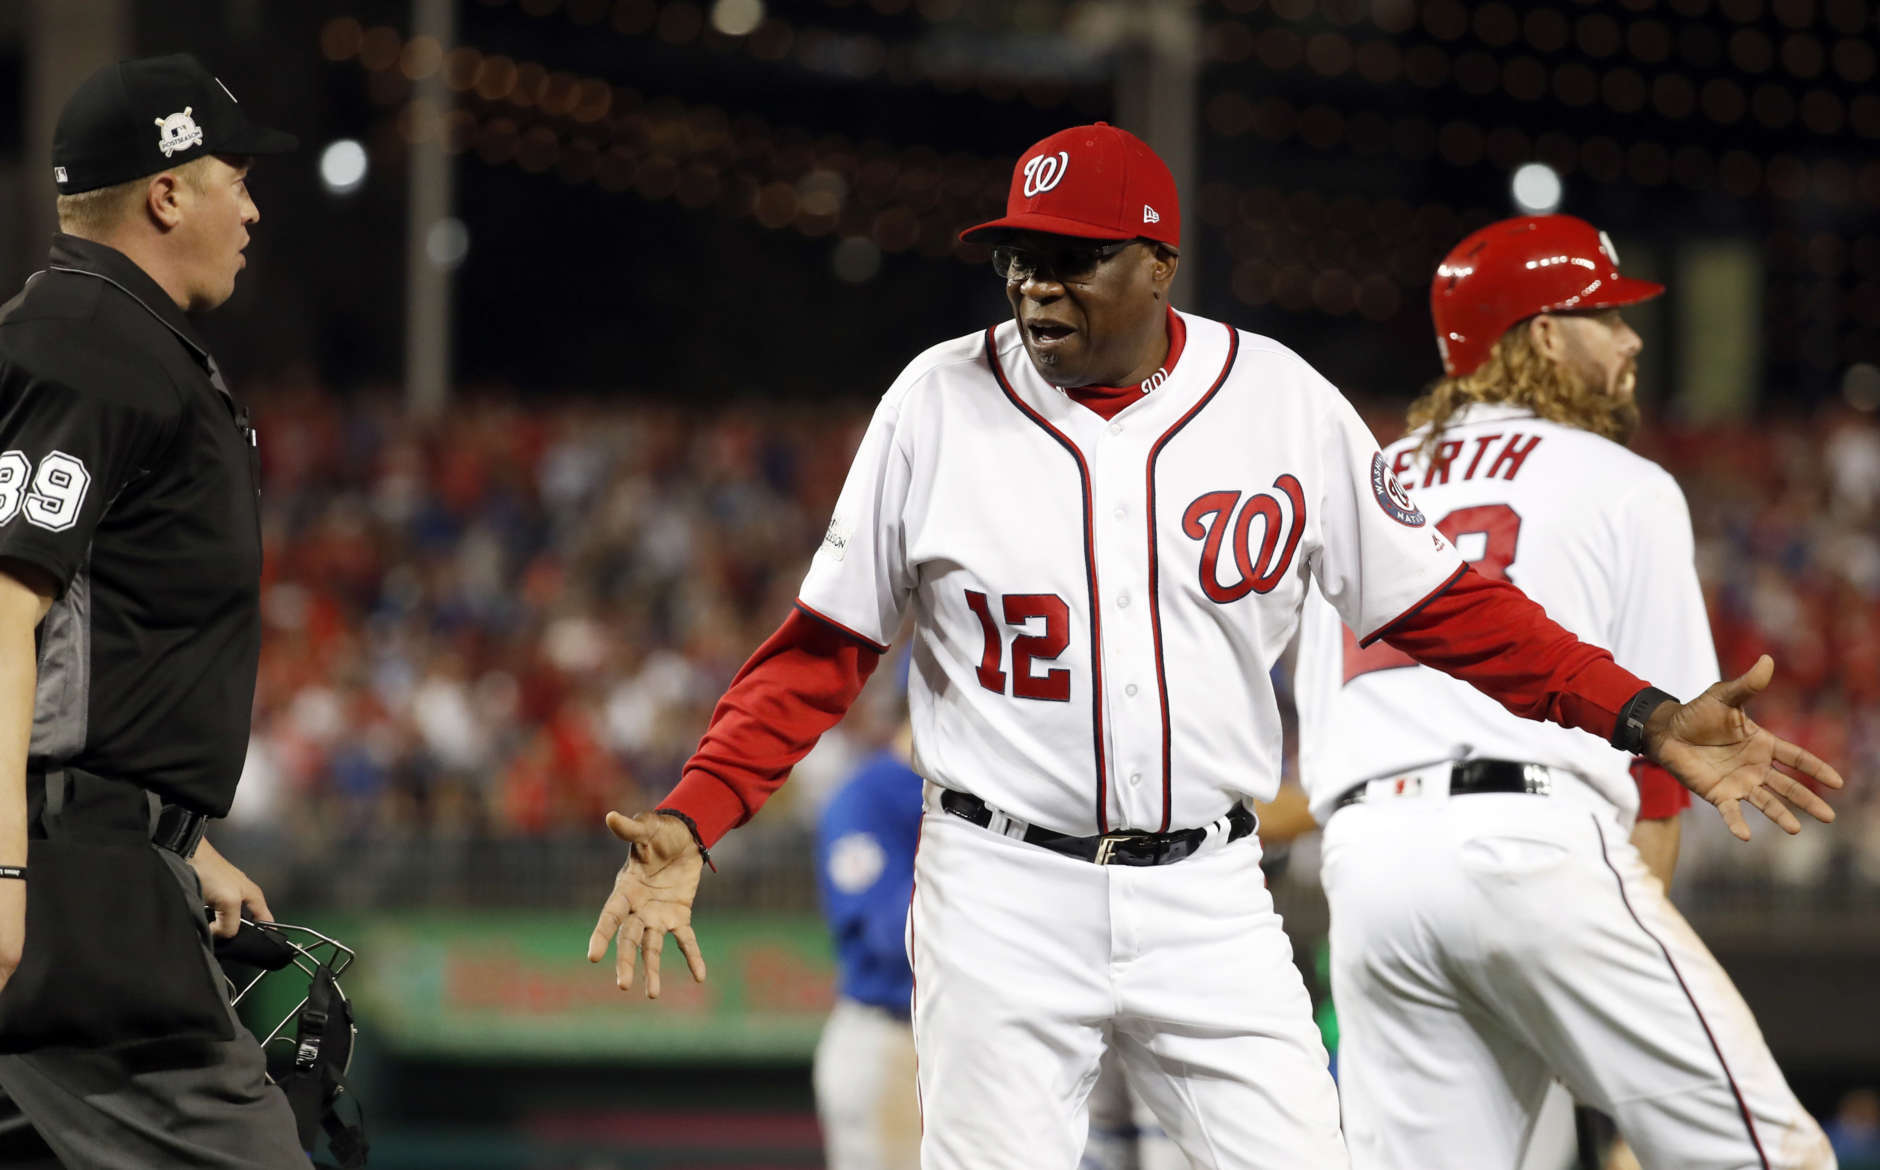 Washington Nationals manager Dusty Baker (12) argues a call of an out on Ryan Zimmerman with home plate umpire Cory Blaser, left, during Game 1 of baseball's National League Division Series against the Chicago Cubs, at Nationals Park, Friday, Oct. 6, 2017, in Washington. The Cubs won 3-0. (AP Photo/Alex Brandon)